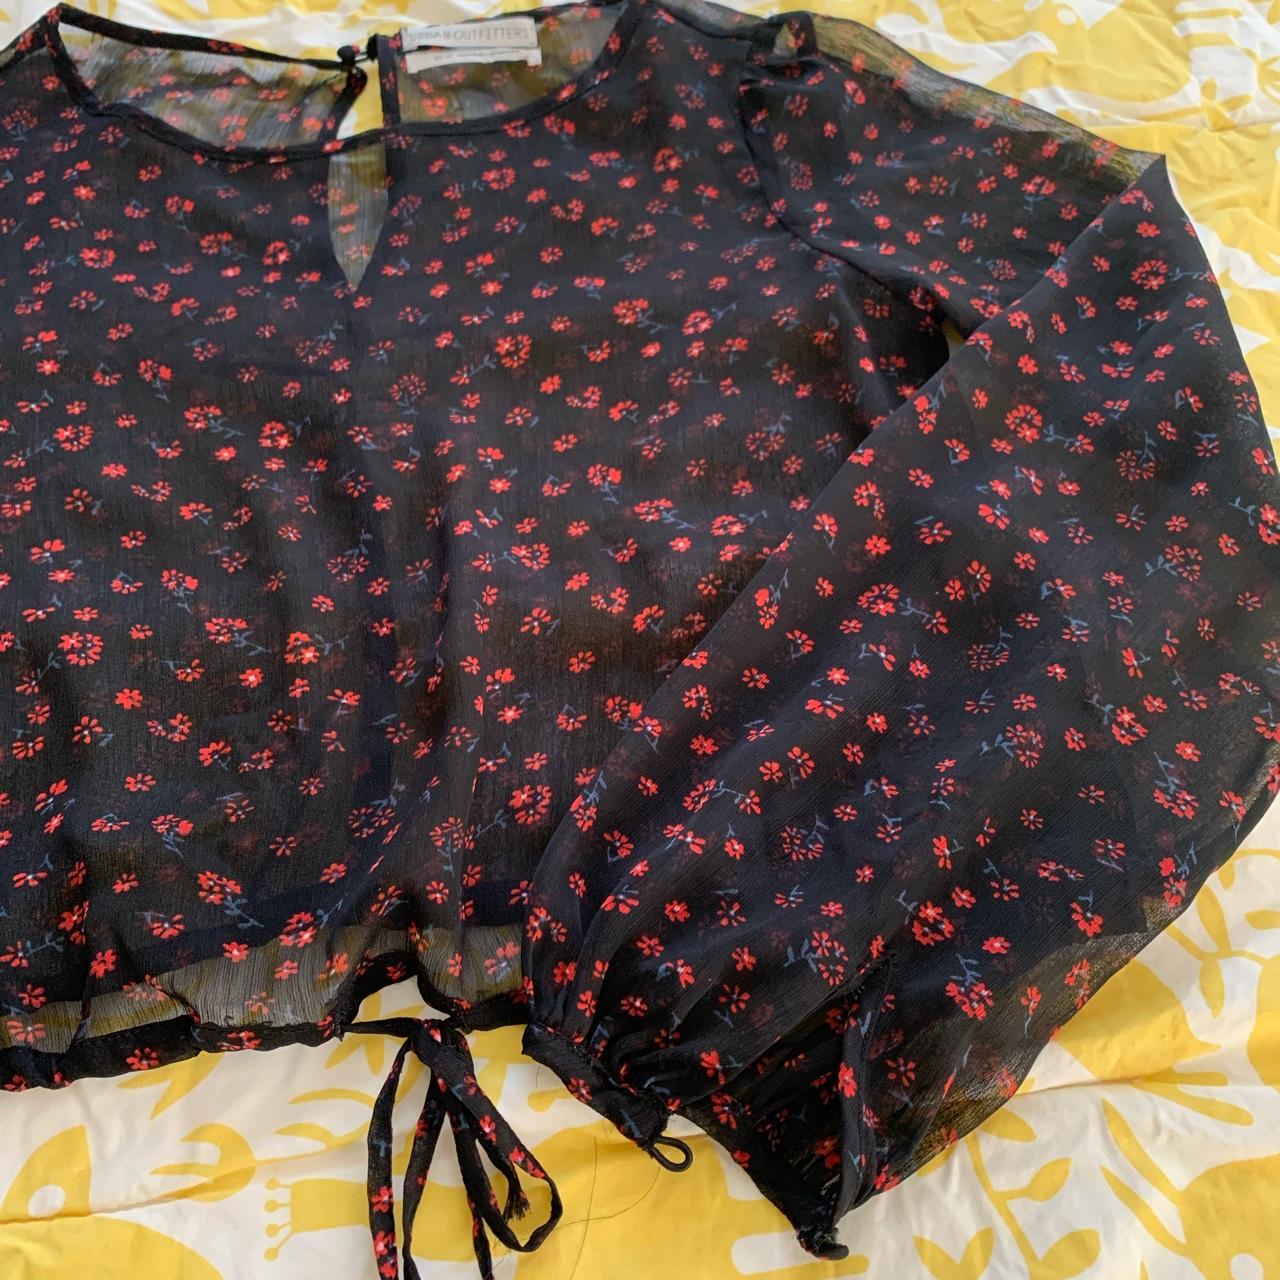 see through black with red flowers blouse overlay... - Depop